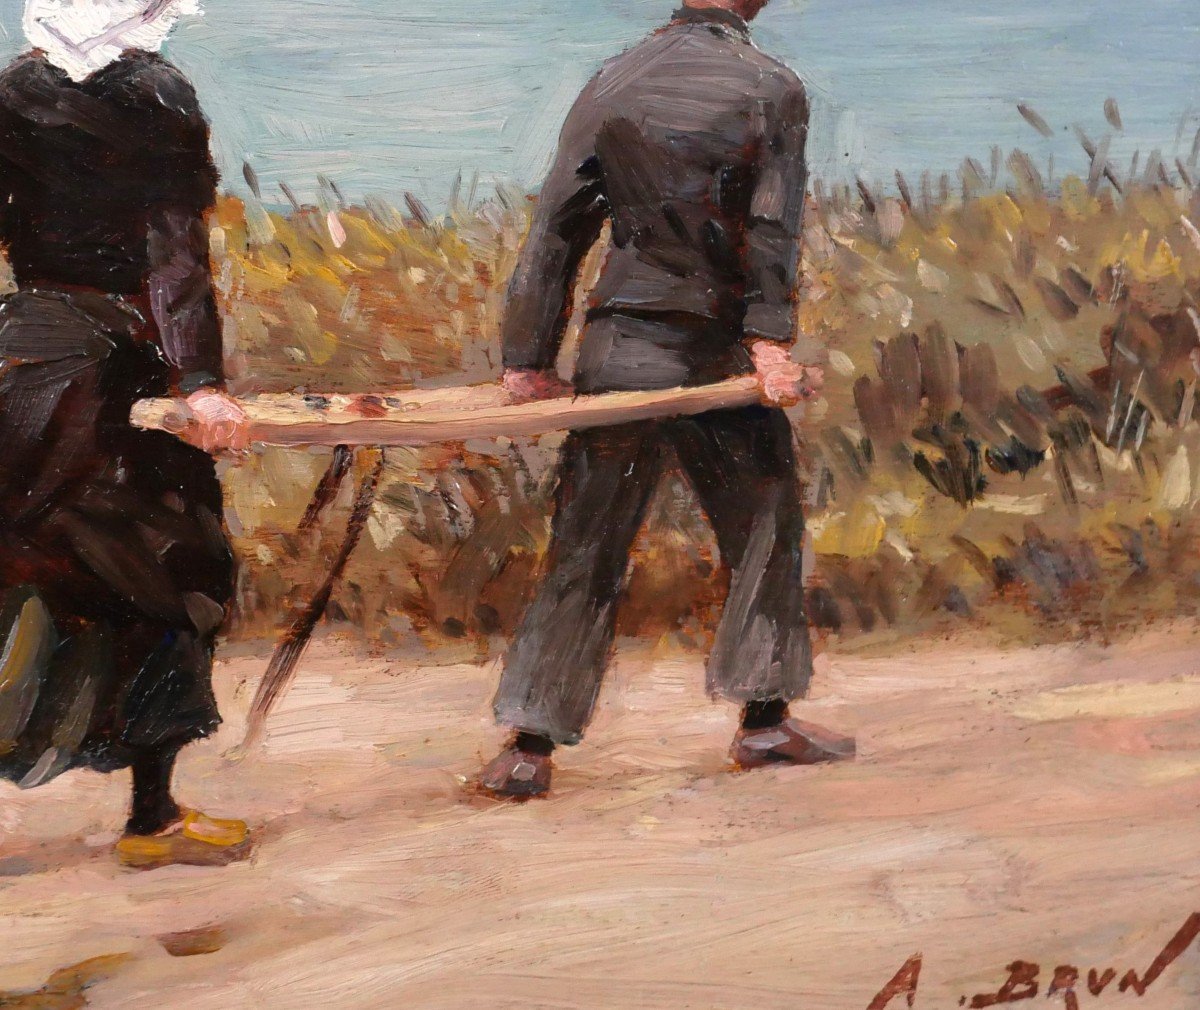 Alexandre Brun 1853-1941 Brittany, Figures Carrying A Load, Painting, Circa 1900-photo-3